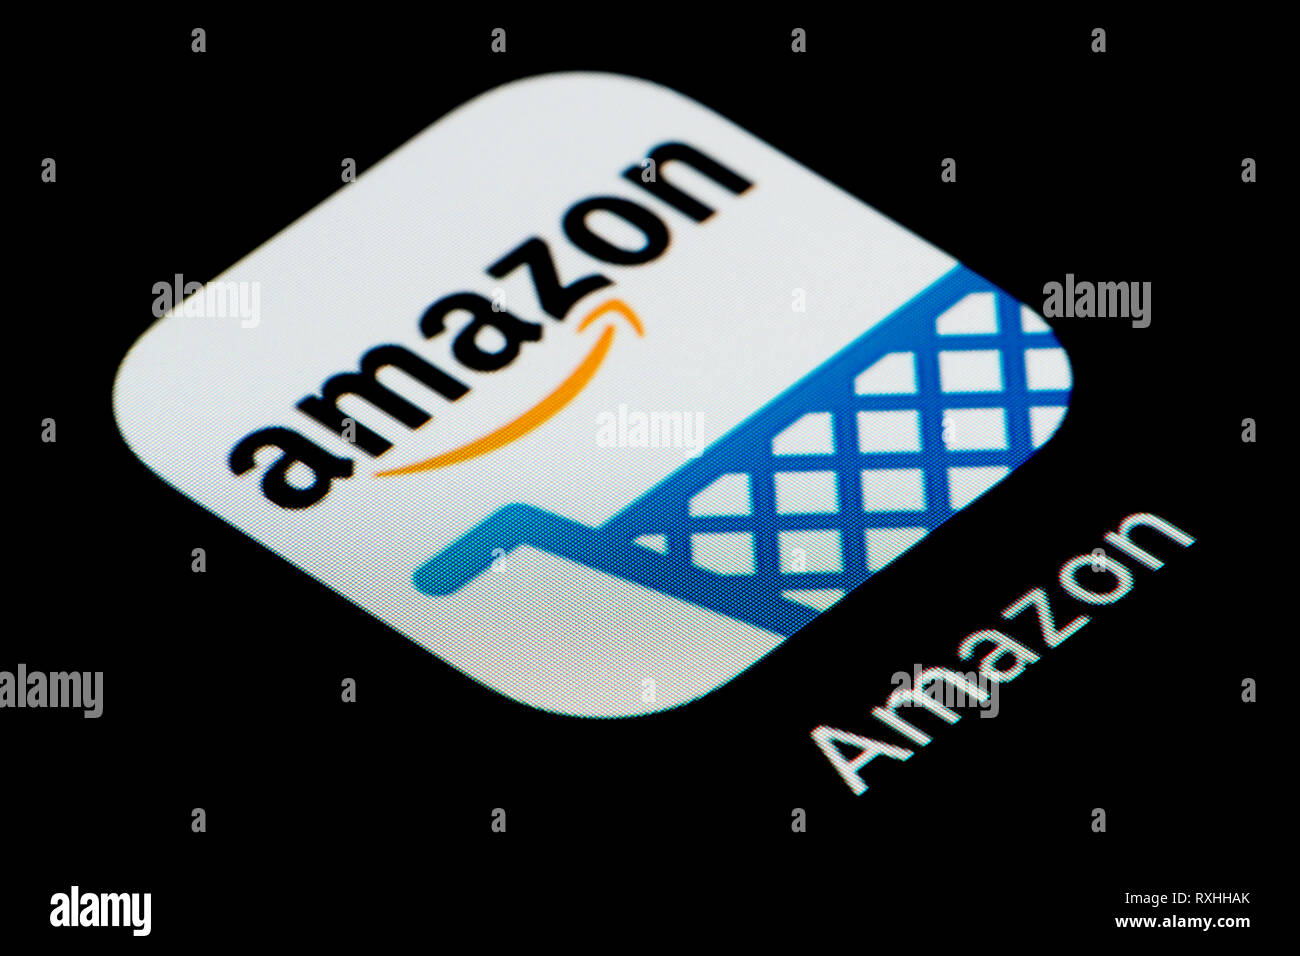 Amazon App Icon High Resolution Stock Photography And Images Alamy